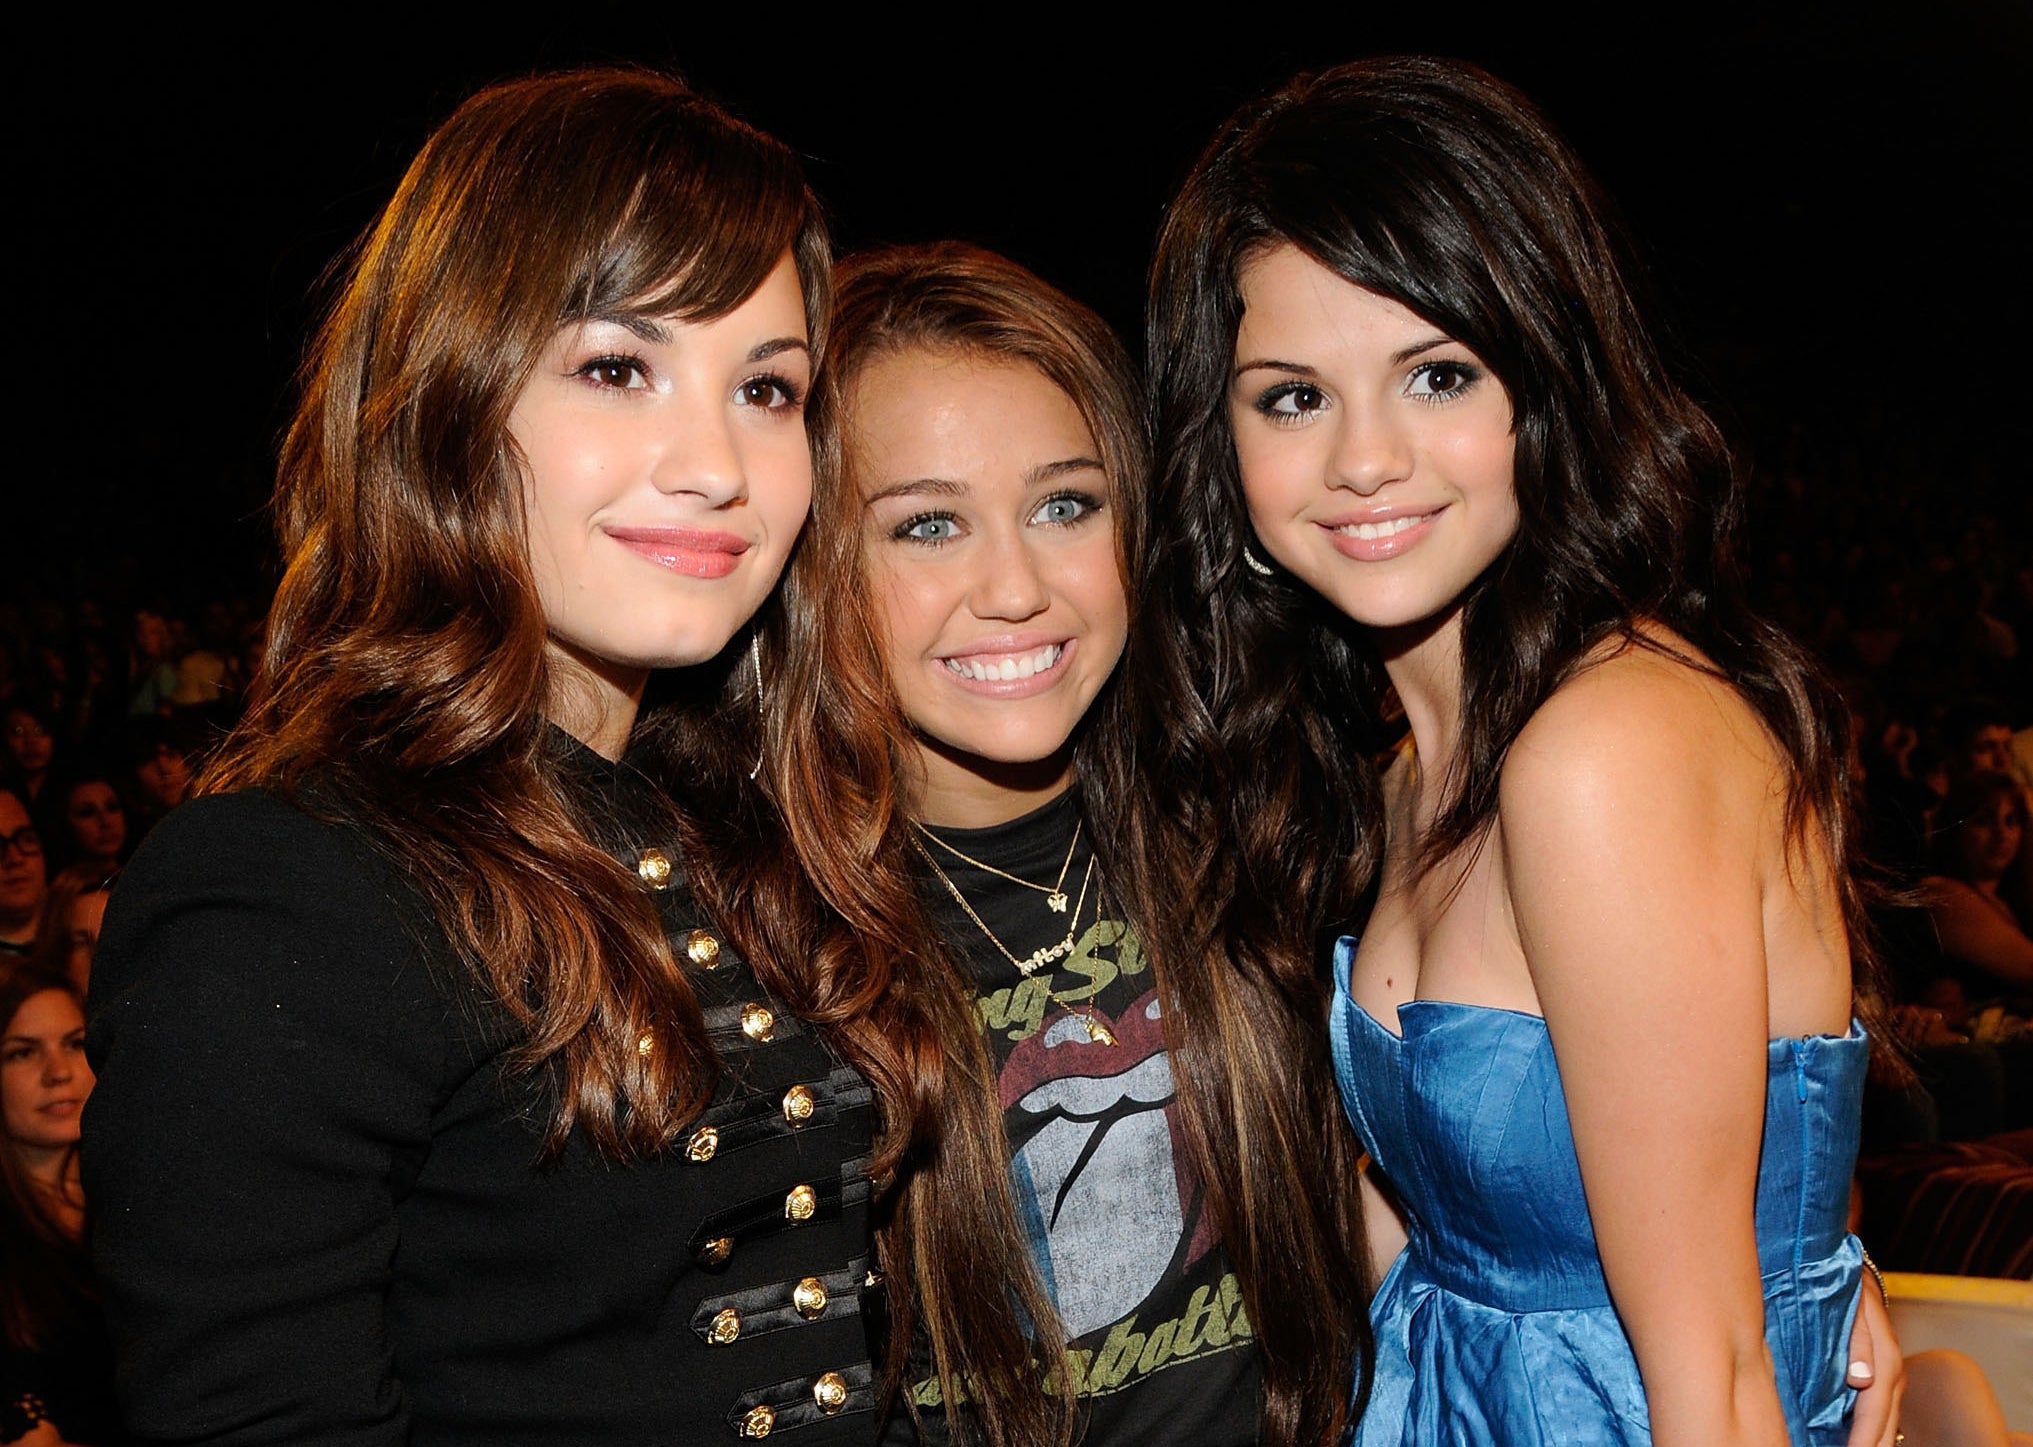 Demi poses with Miley Cyrus and Selena Gomez as a teen